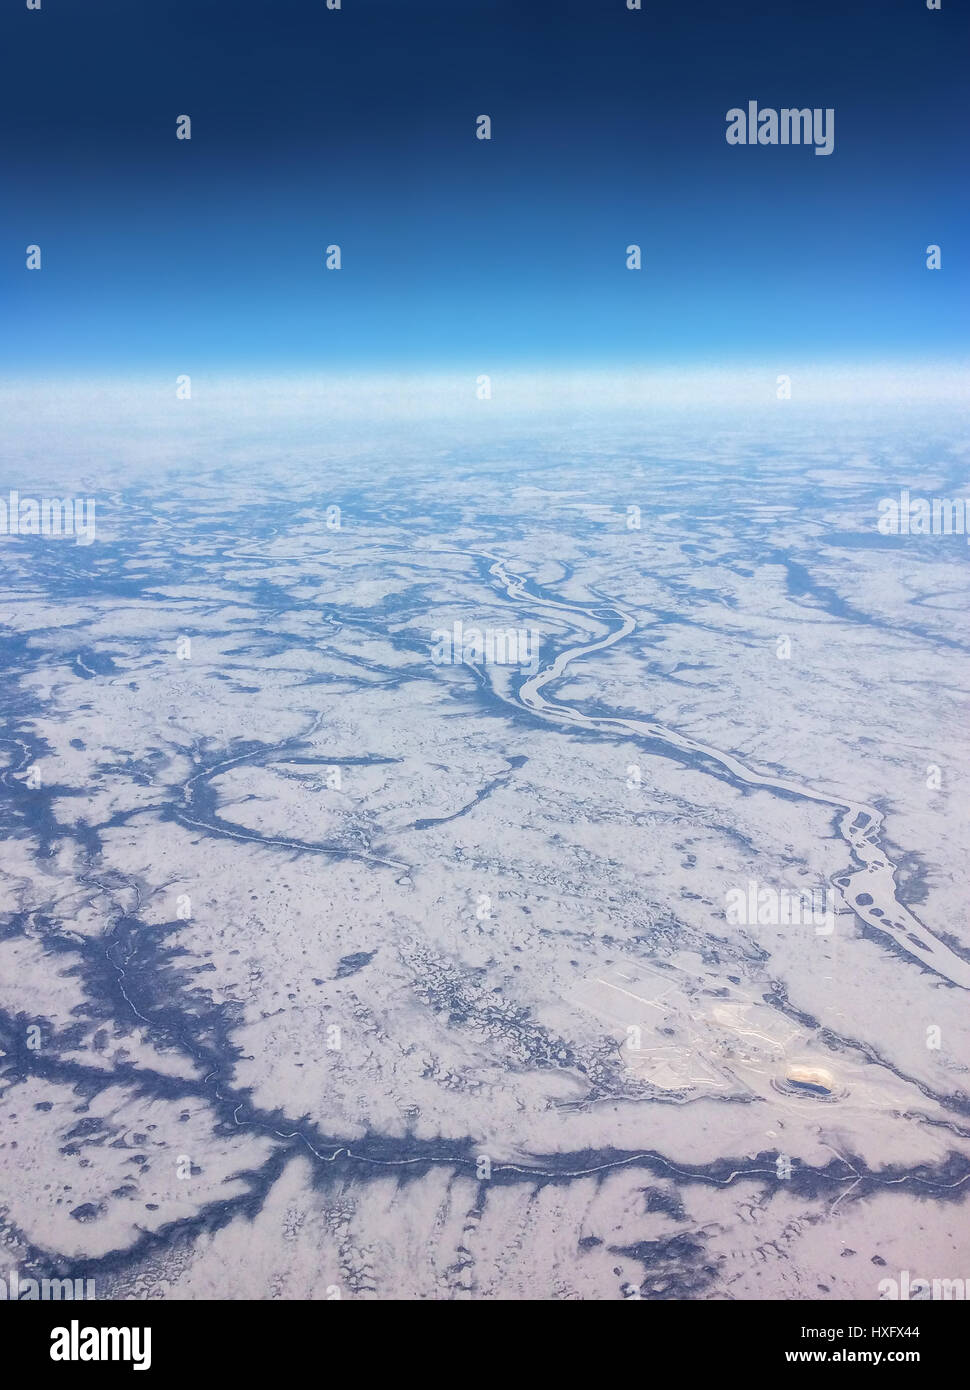 Aerial view of Northern Canada taken from flight over the vast expanse of frozen rivers and snowy landscape Stock Photo